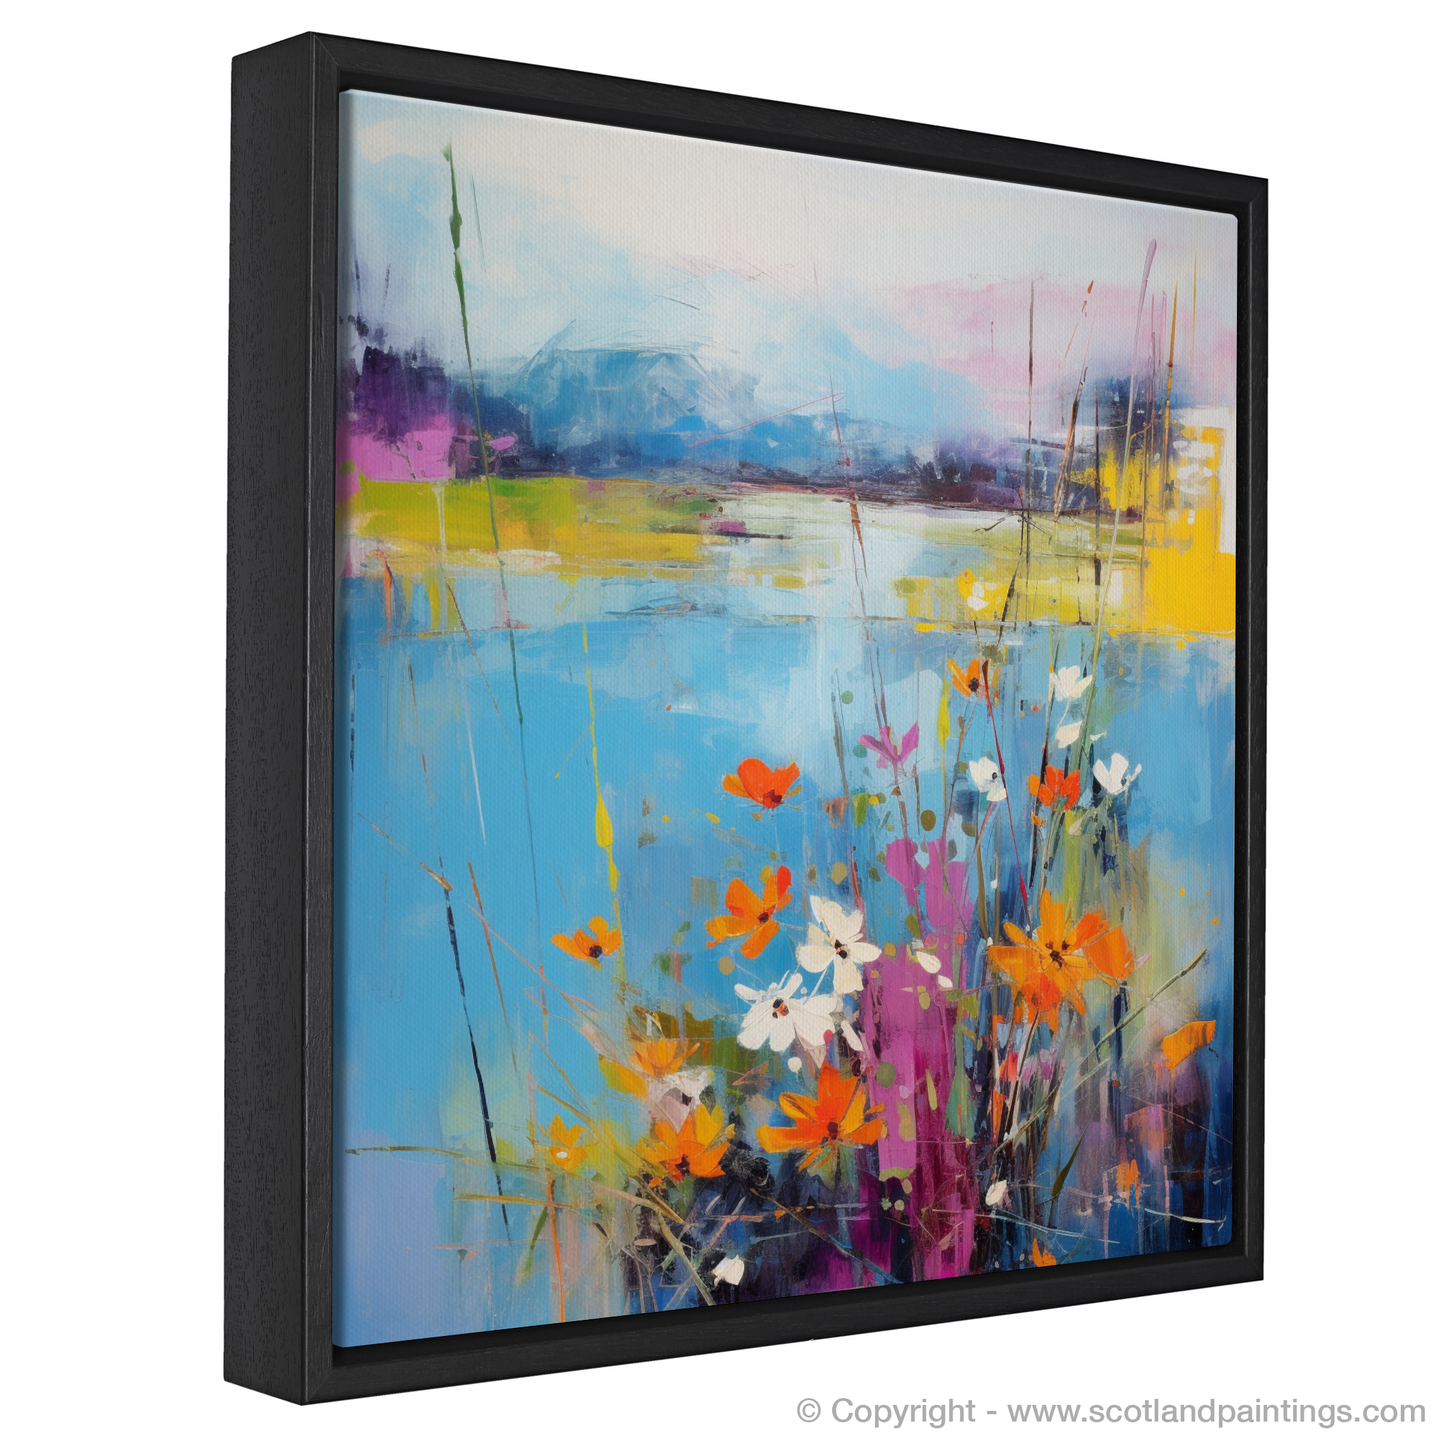 Painting and Art Print of Wildflowers by Loch Lomond entitled "Wildflowers Dance by Loch Lomond".